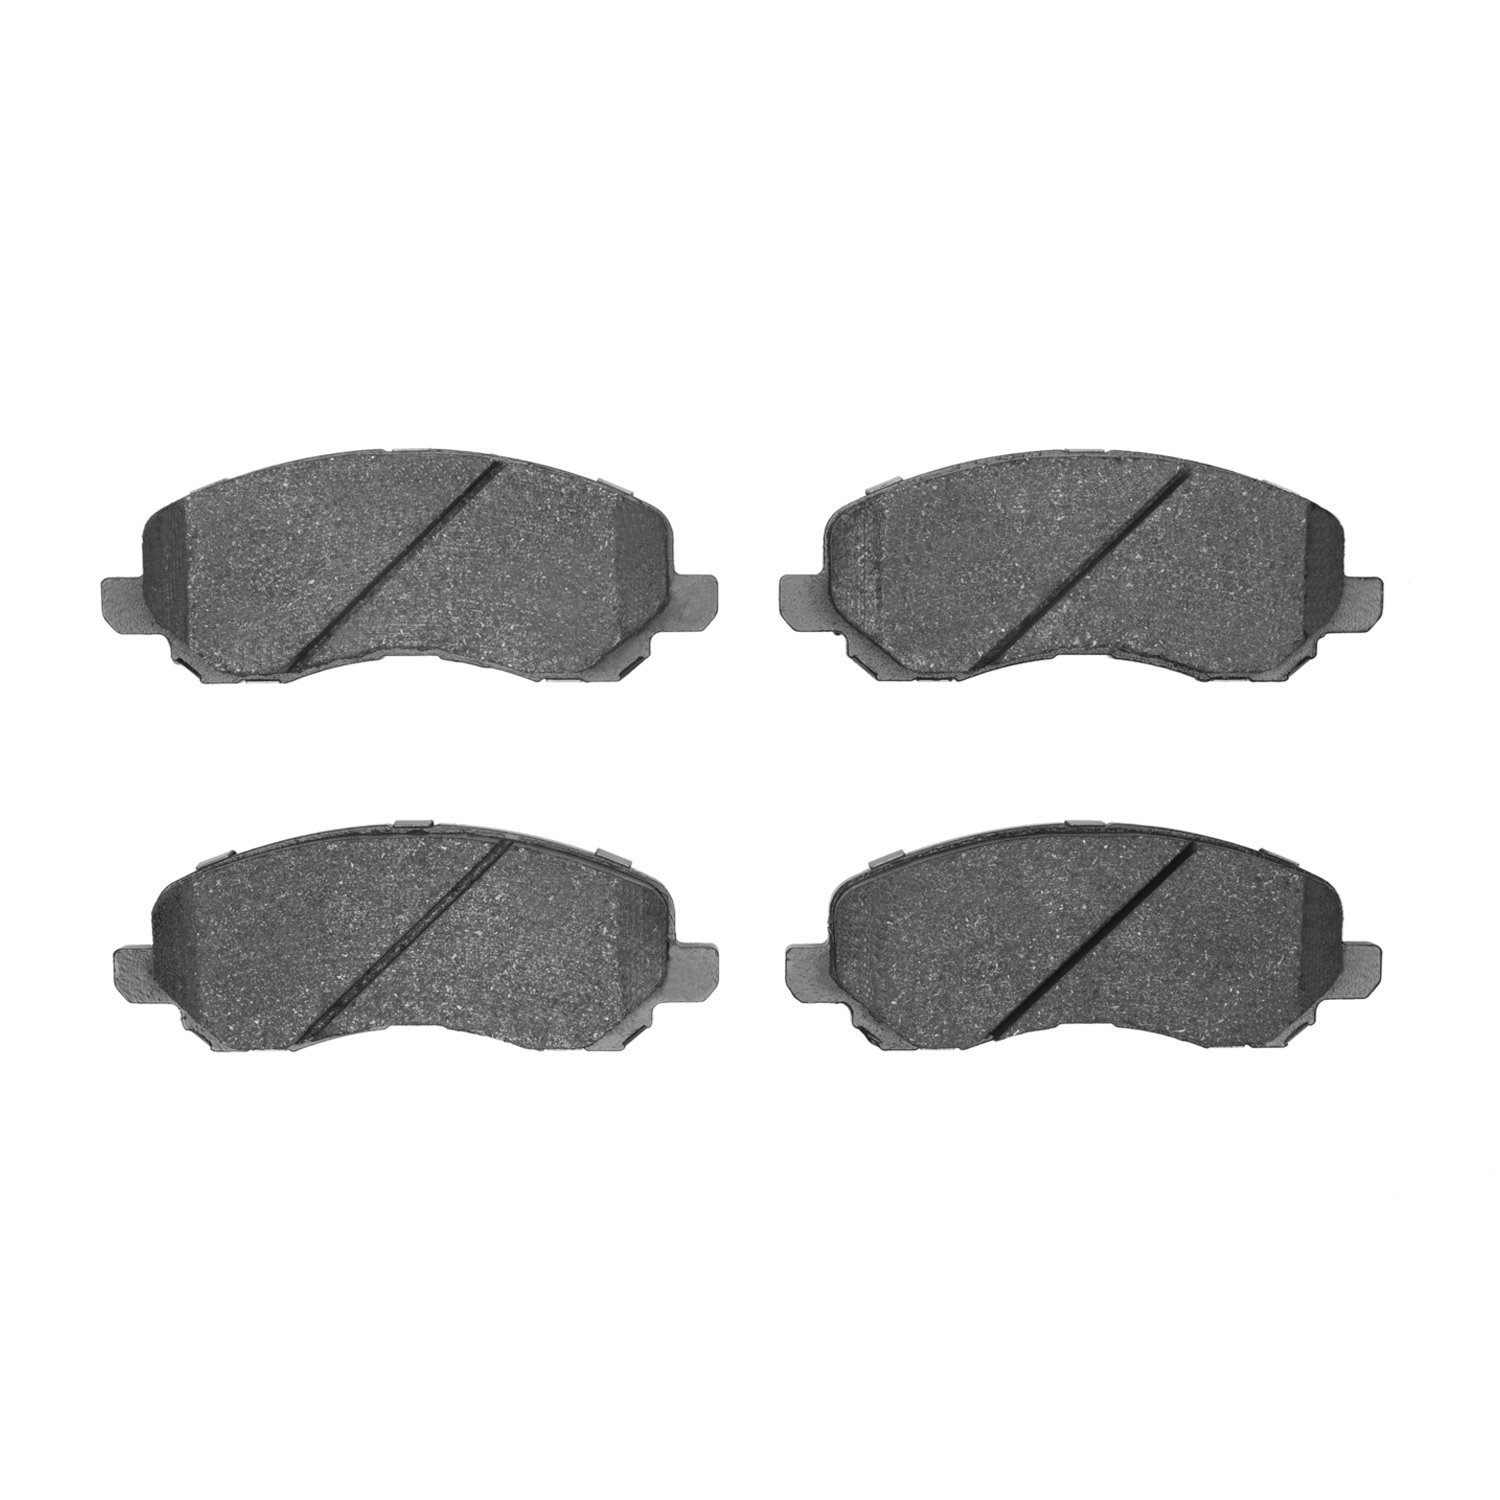 1000-0866-00 Track/Street Low-Metallic Brake Pads Kit, Fits Select Multiple Makes/Models, Position: Front